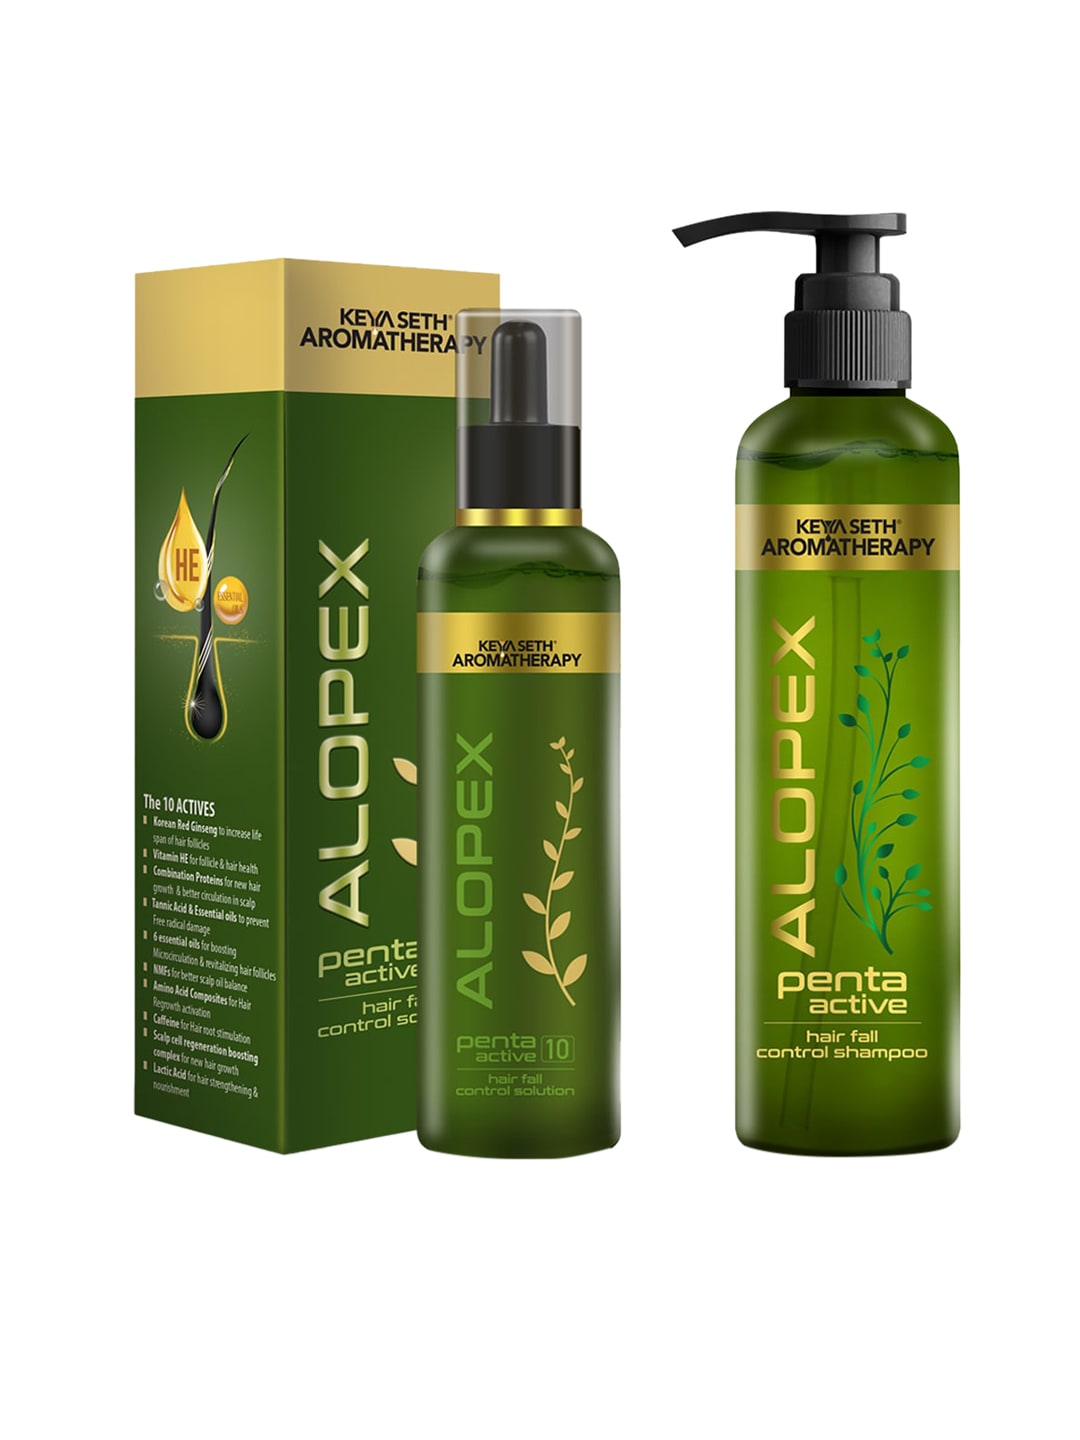 KEYA SETH Alopex Penta Active Hair Fall Control Treatment Kit - Hair Tonic  & Shampoo Price in India, Full Specifications & Offers 